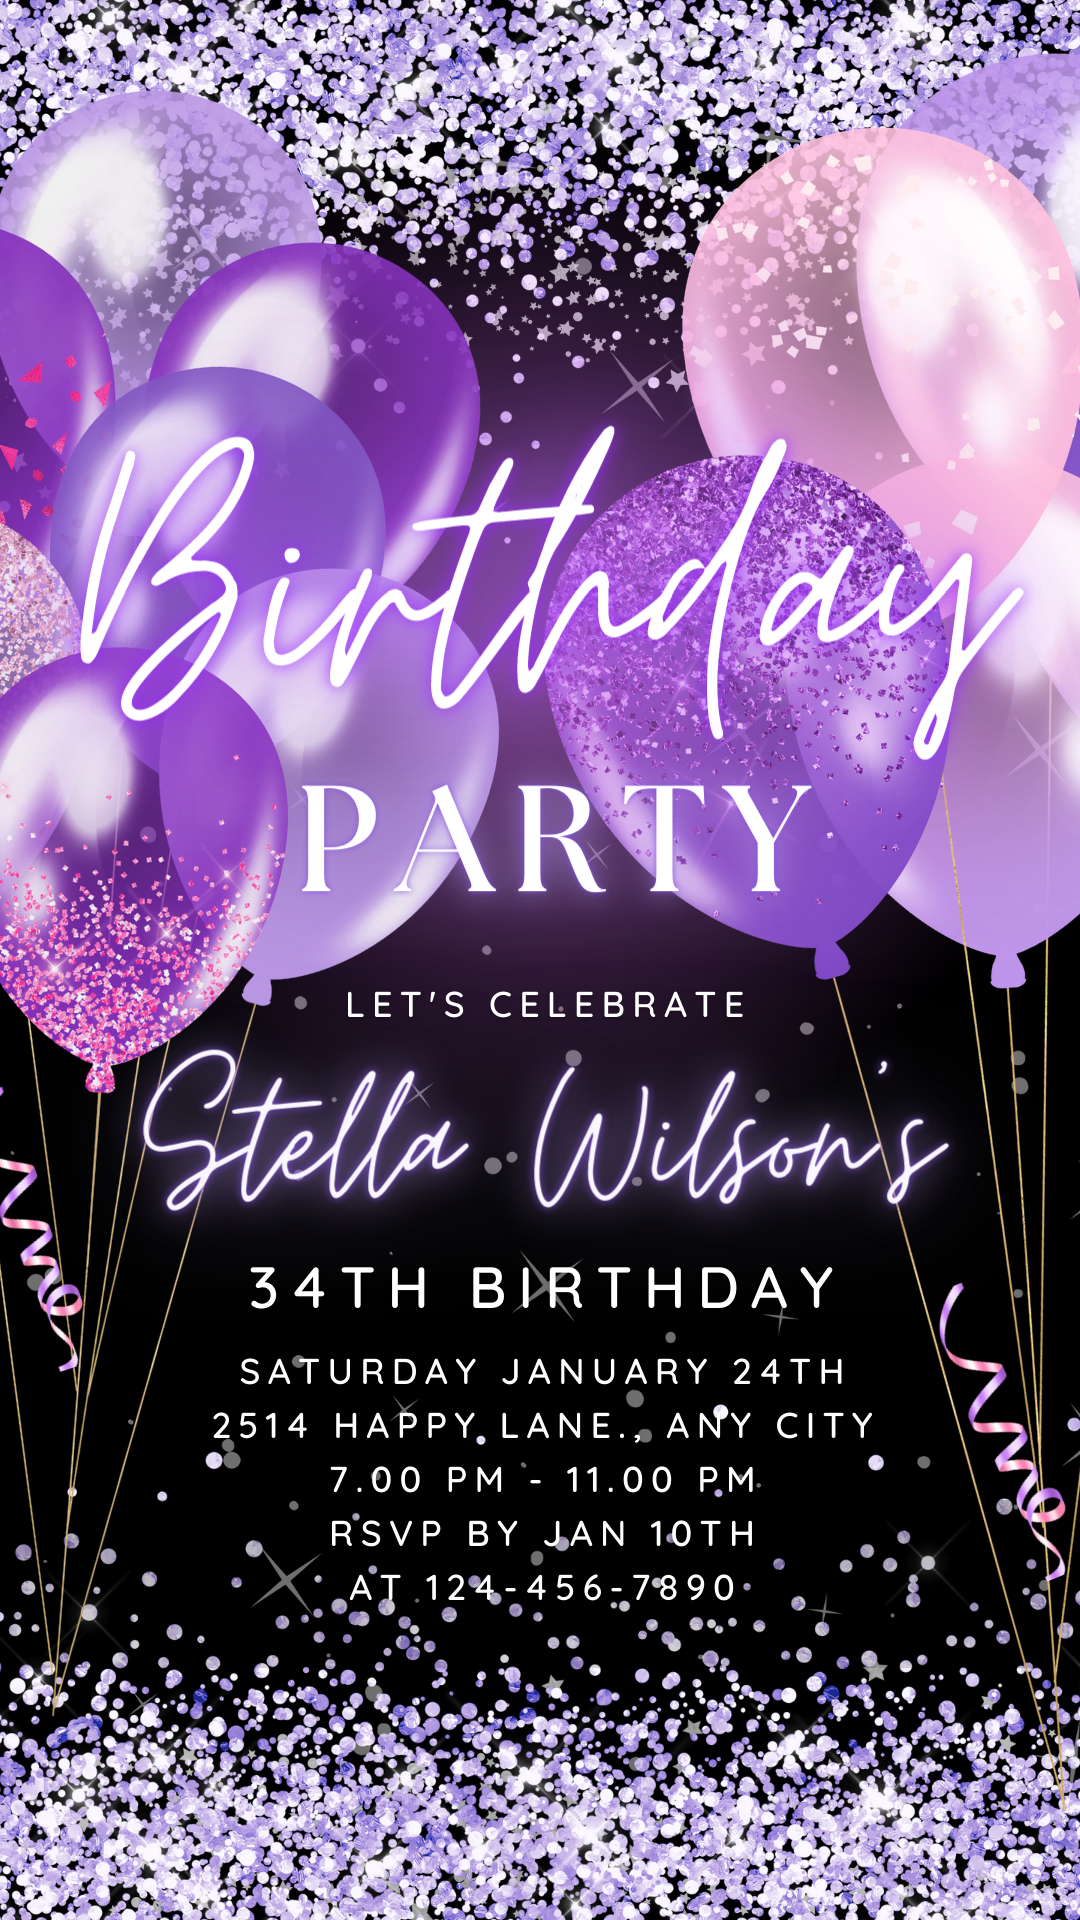 Animated Purple Birthday invitation, Party Invite for any Event Celebration, Editable Video Template for any Age| Digital E-vite